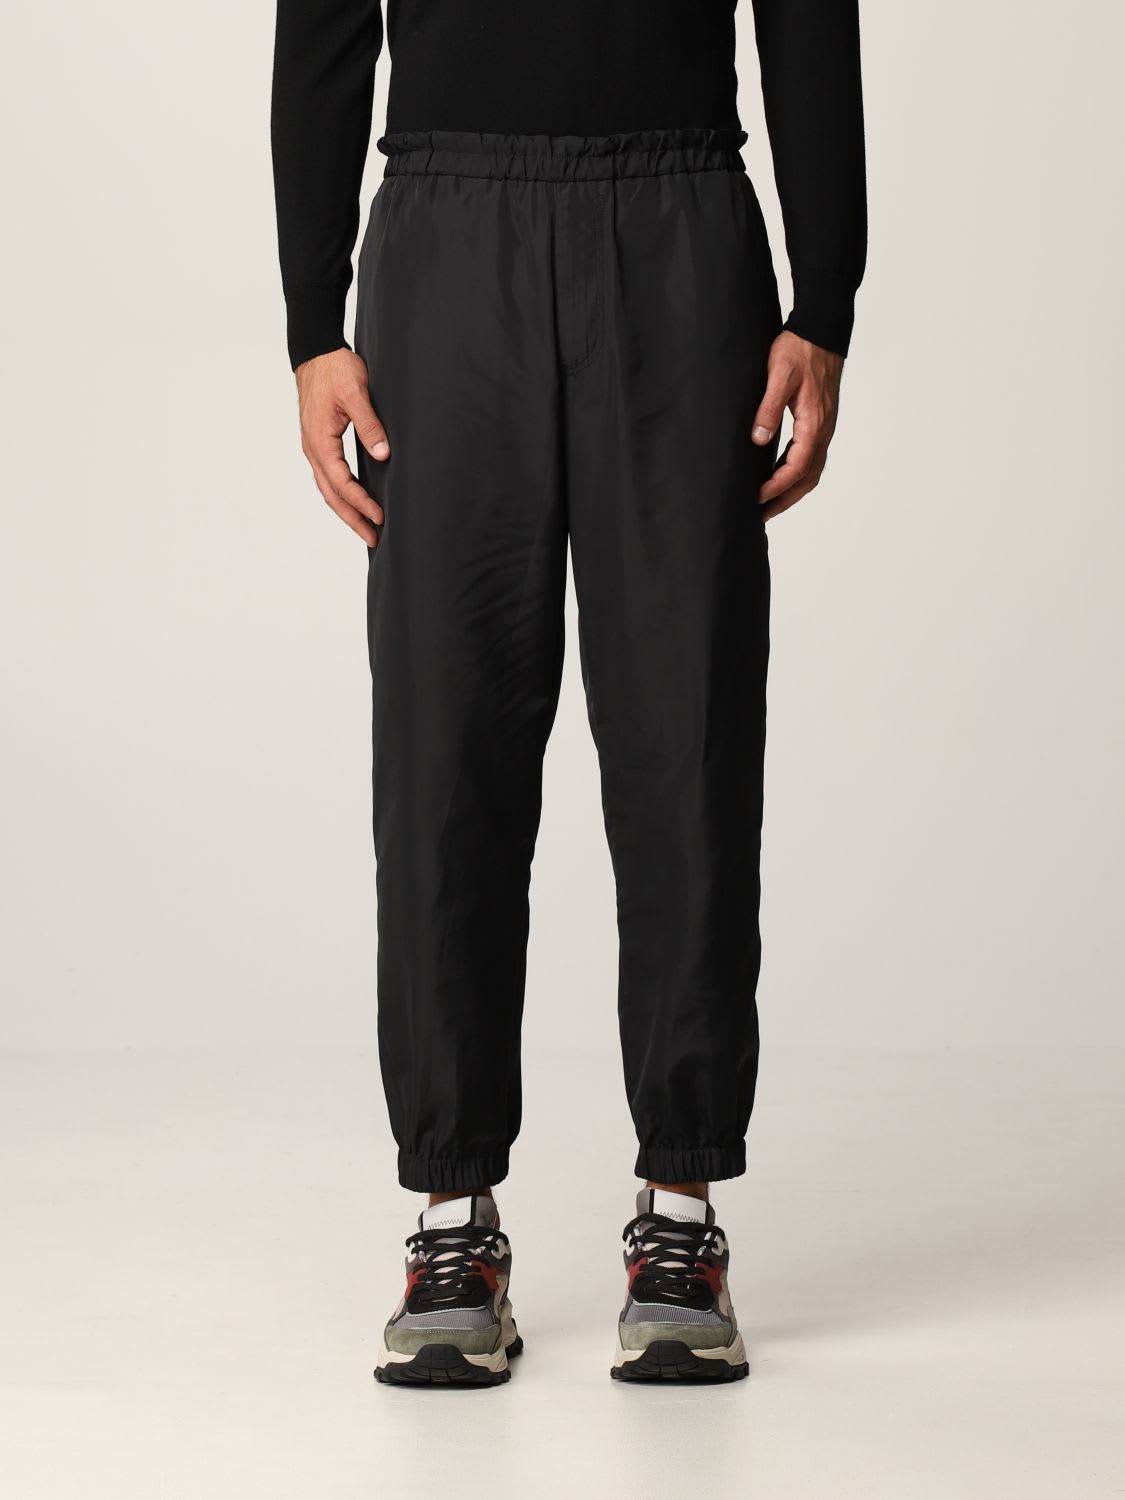 Etro Pants Etro Jogging Pants In Technical Fabric With Logoed Bands